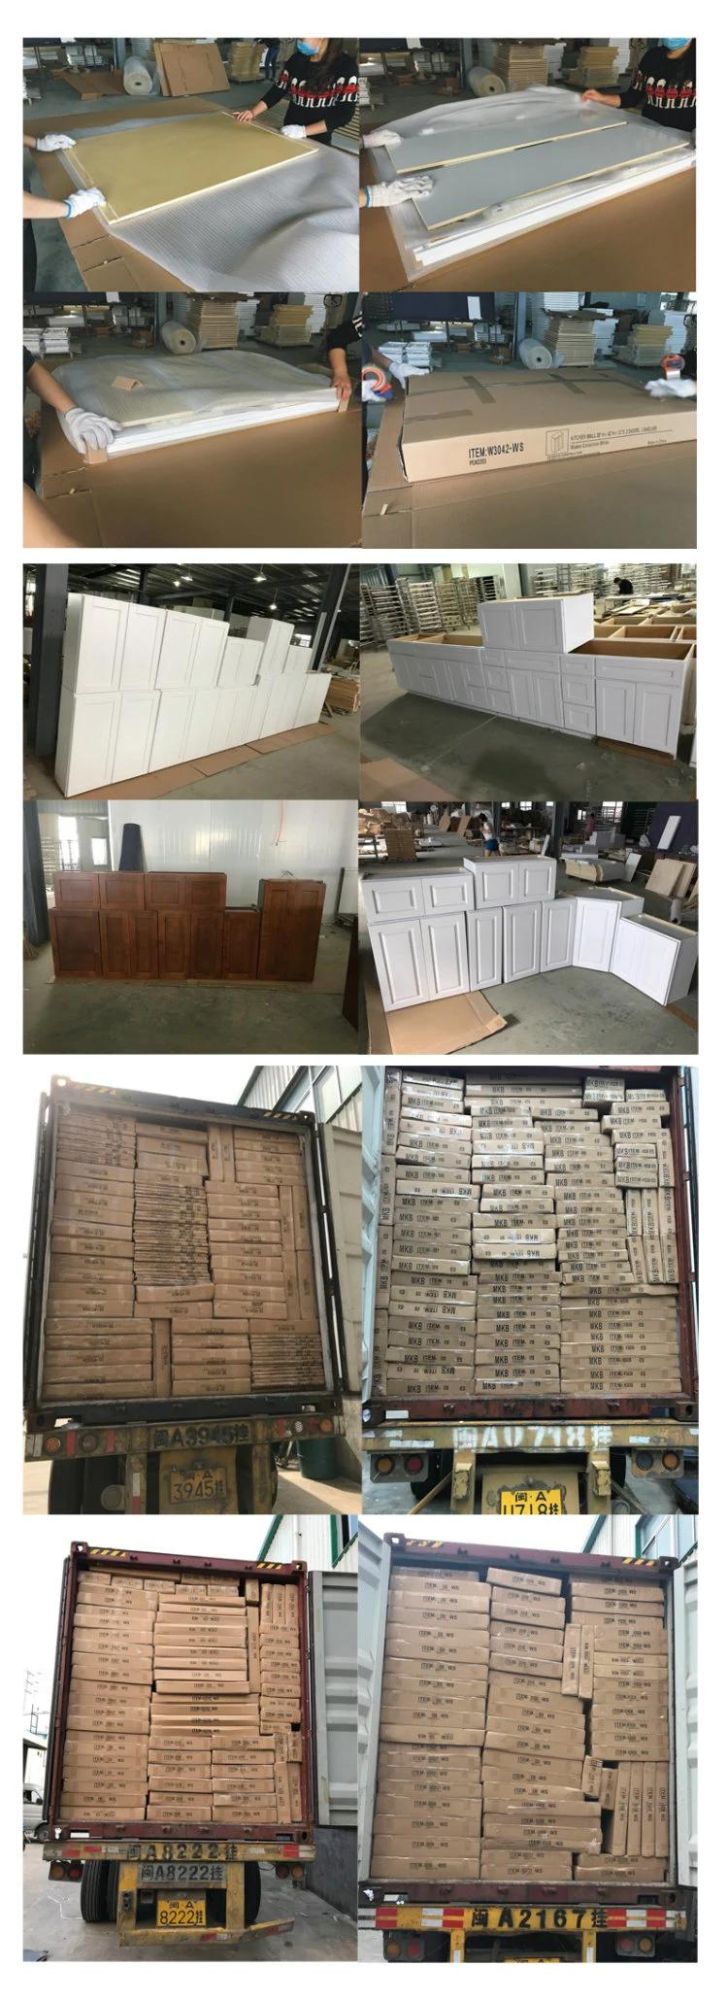 OEM ODM Plywood Cabinext Kd (Flat-Packed) Customized Furniture Kitchen Vanity Cabinets